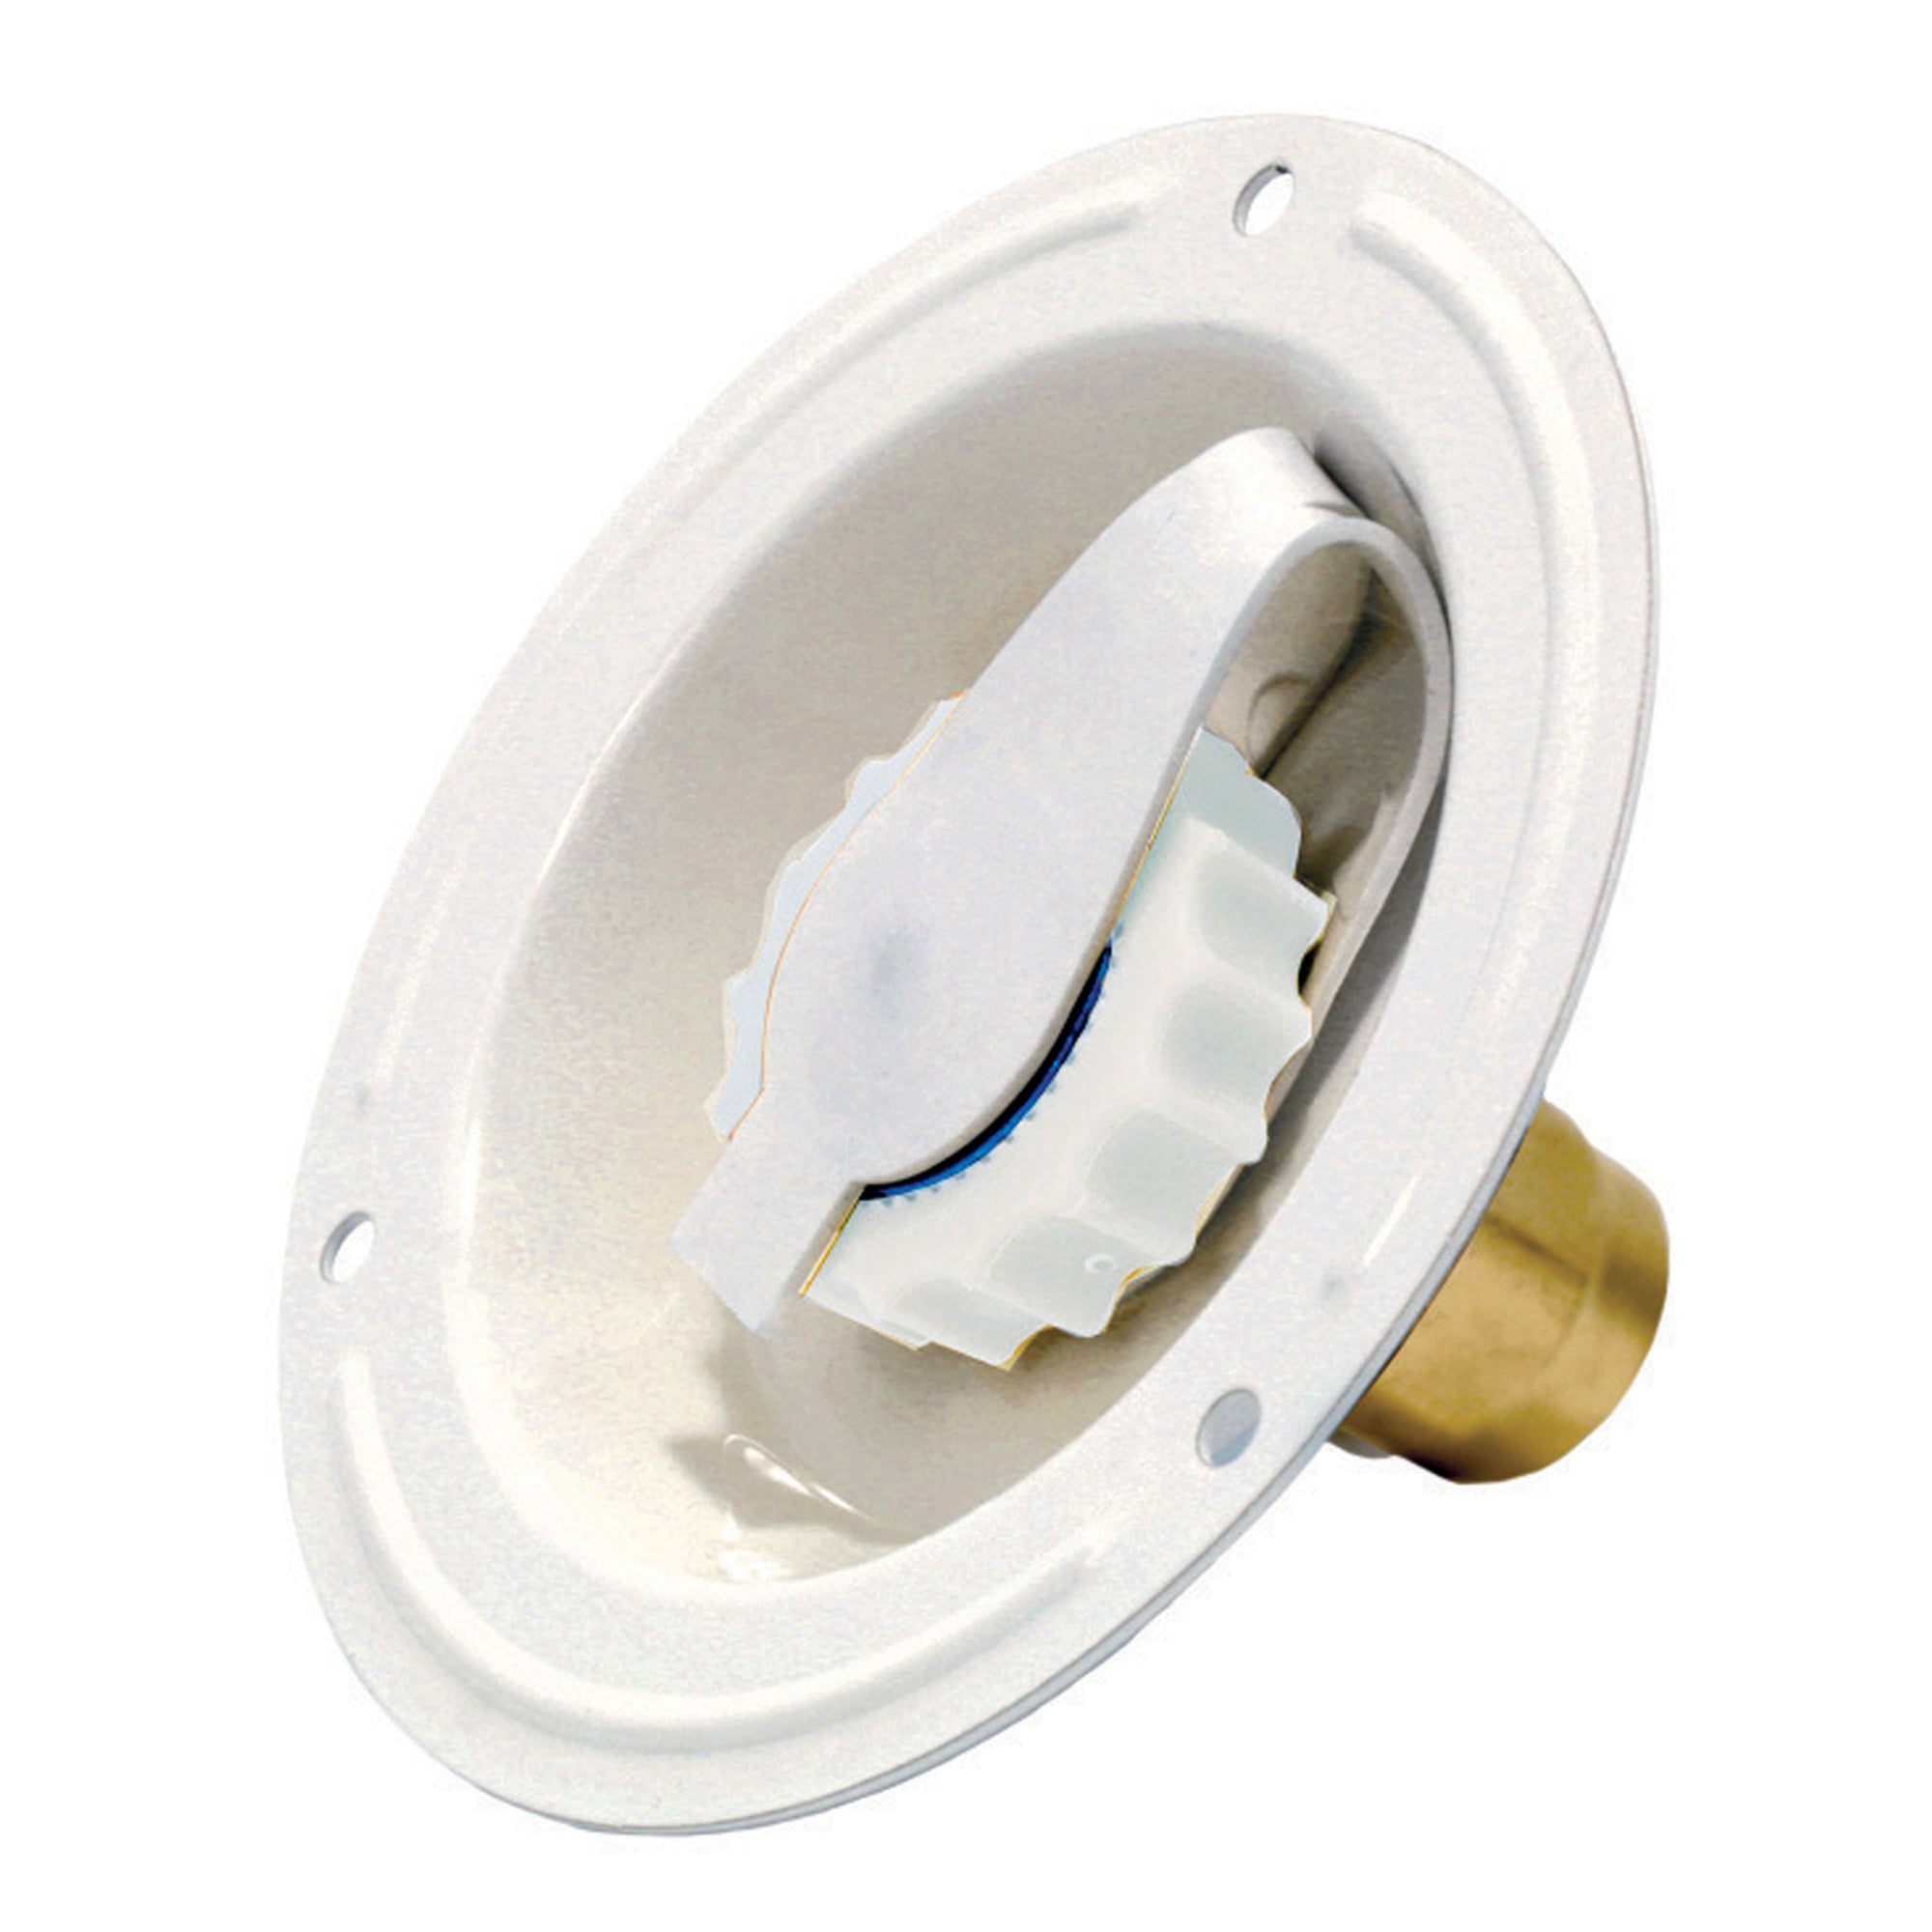 Valterra A01-0177LF Recessed Water Inlet - FPT, Colonial White